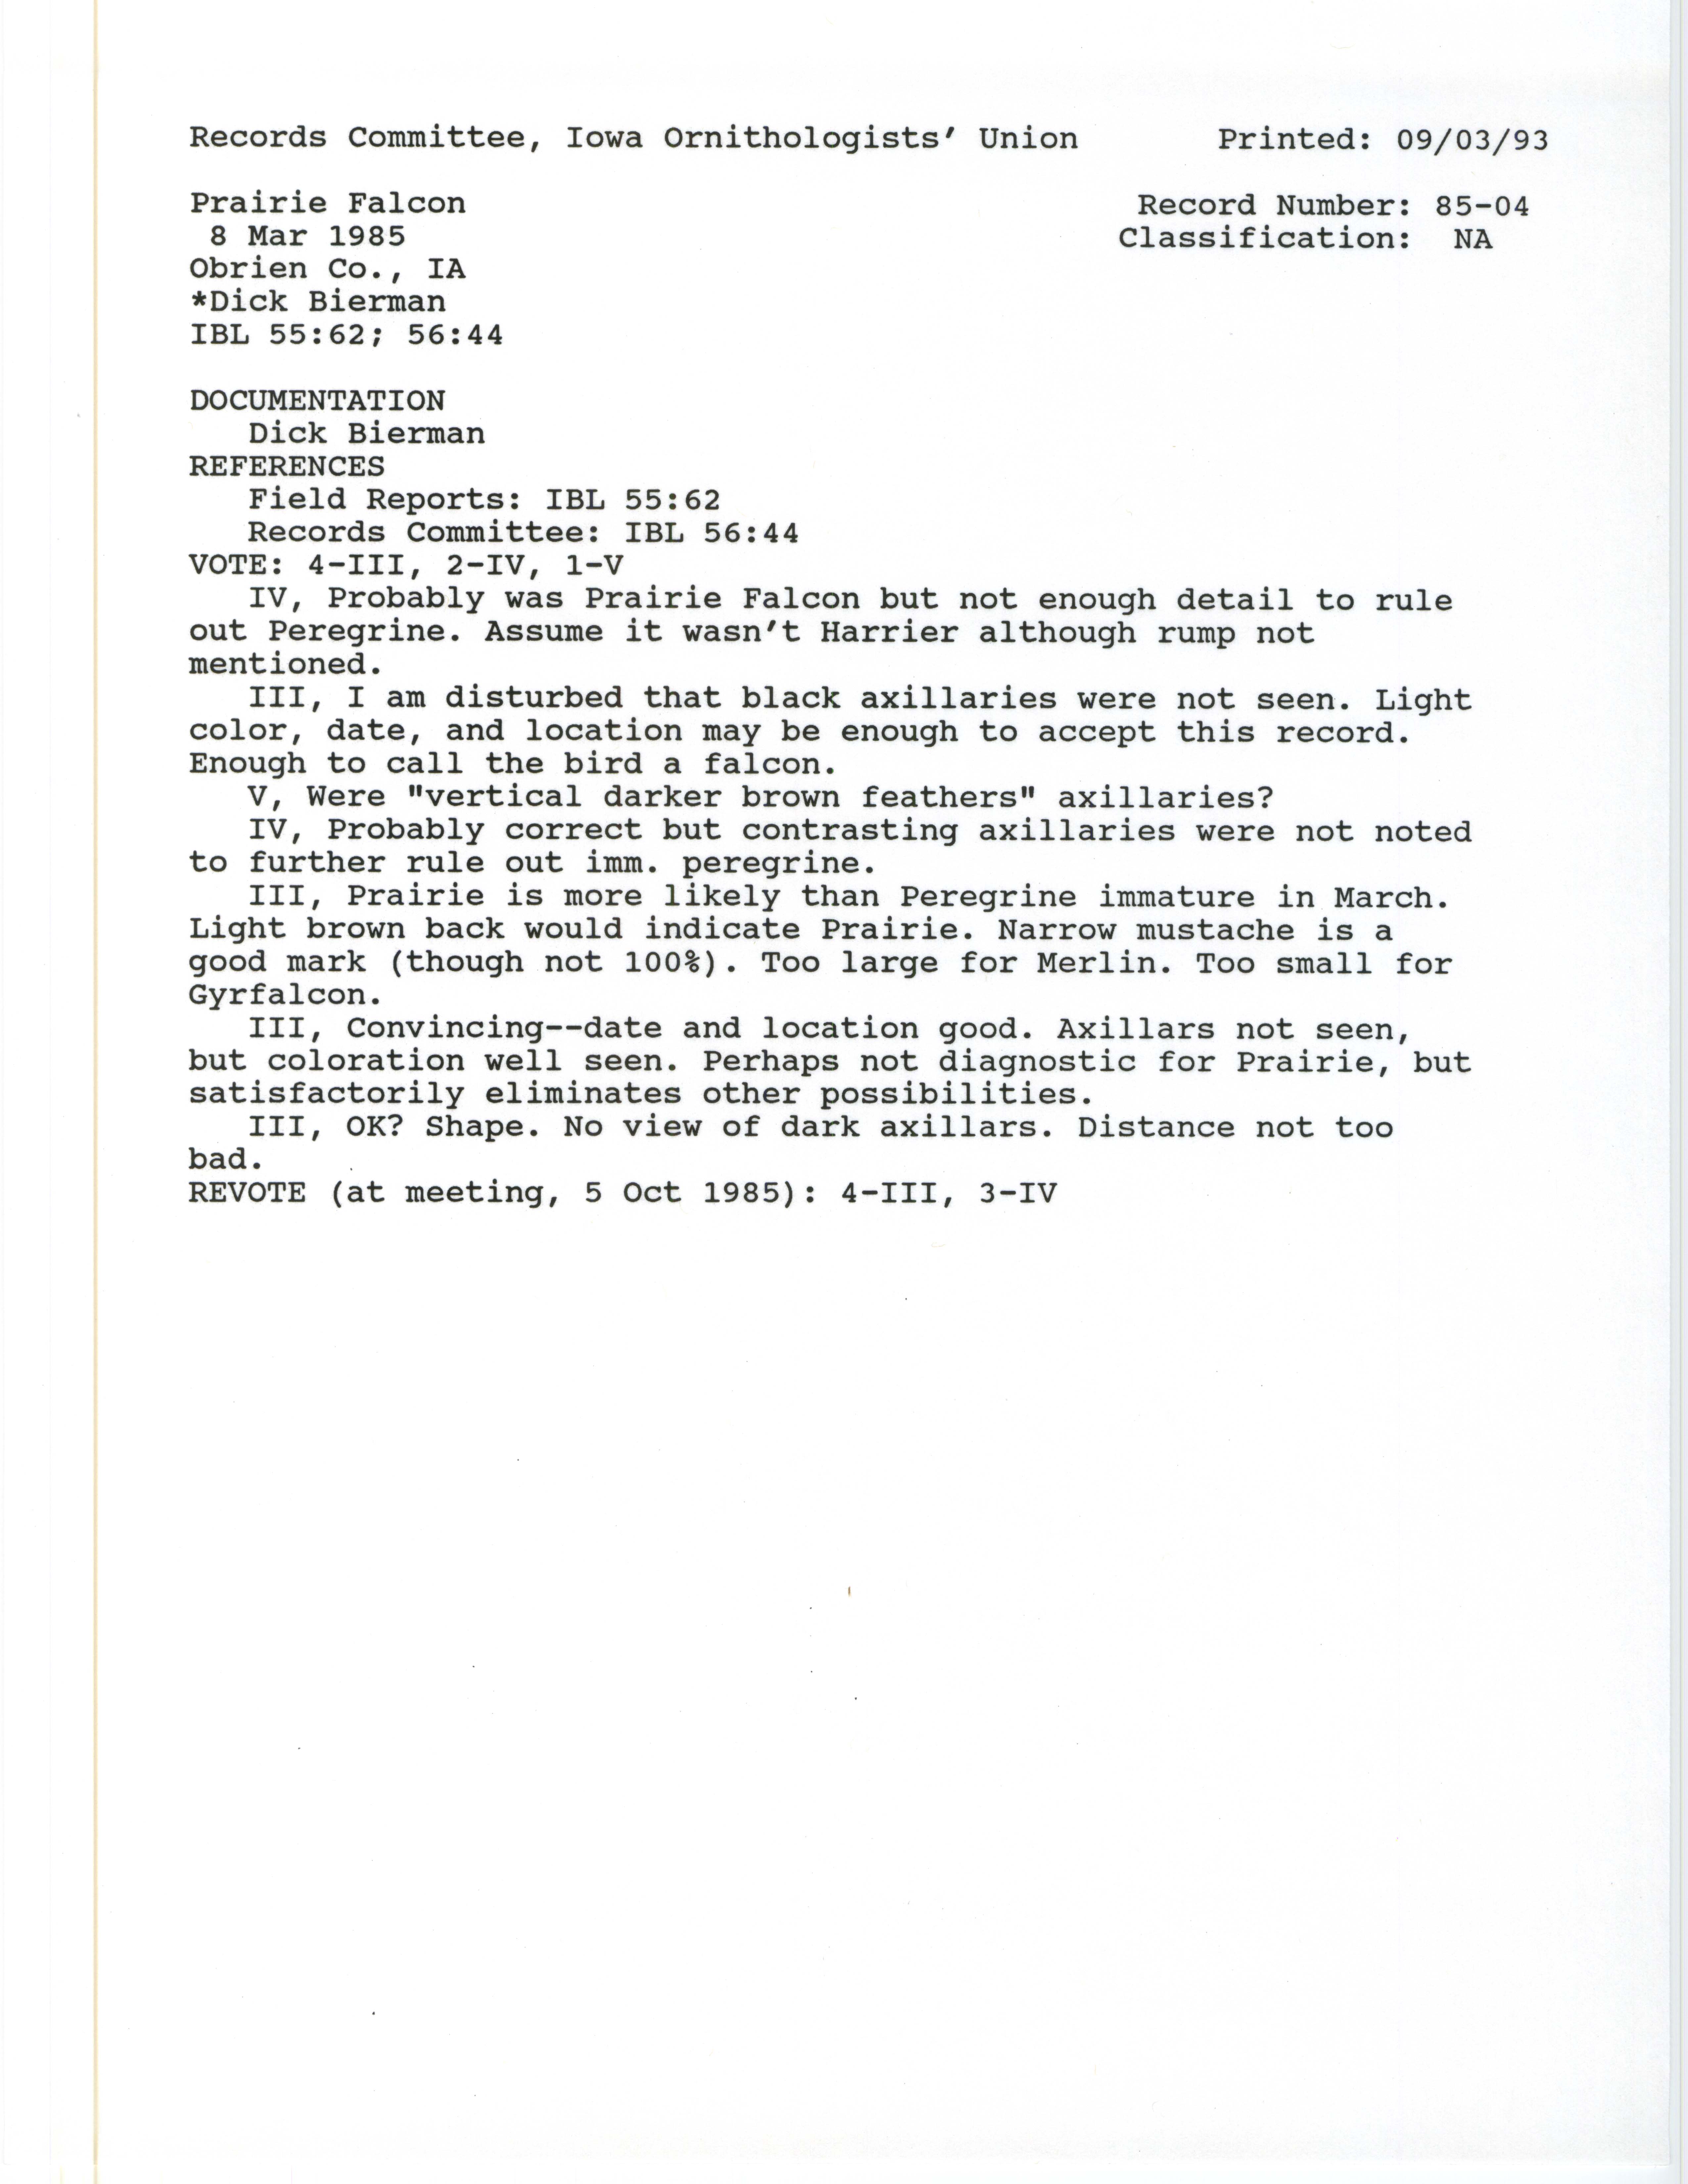 Records Committee review for rare bird sighting of Prairie Falcon southwest of Calumet, 1985